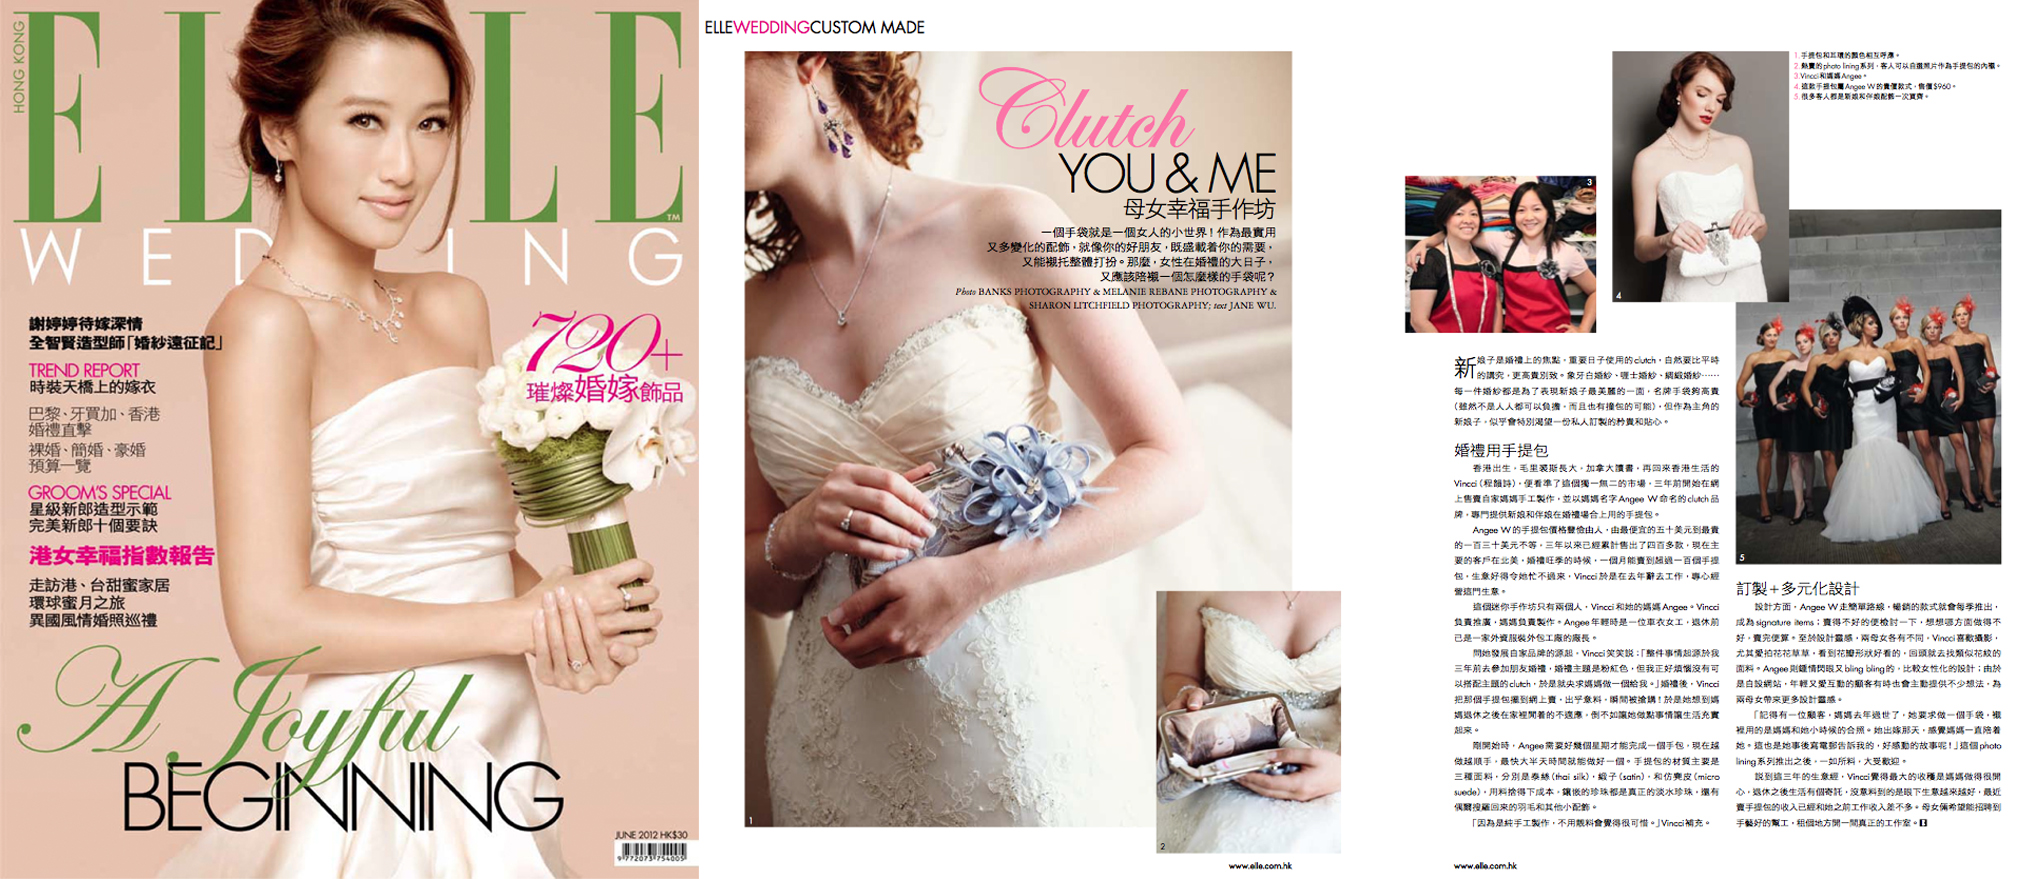 ELLE Wedding Hong Kong Magazine SS2012-cover+ ANGEE W. feature interview